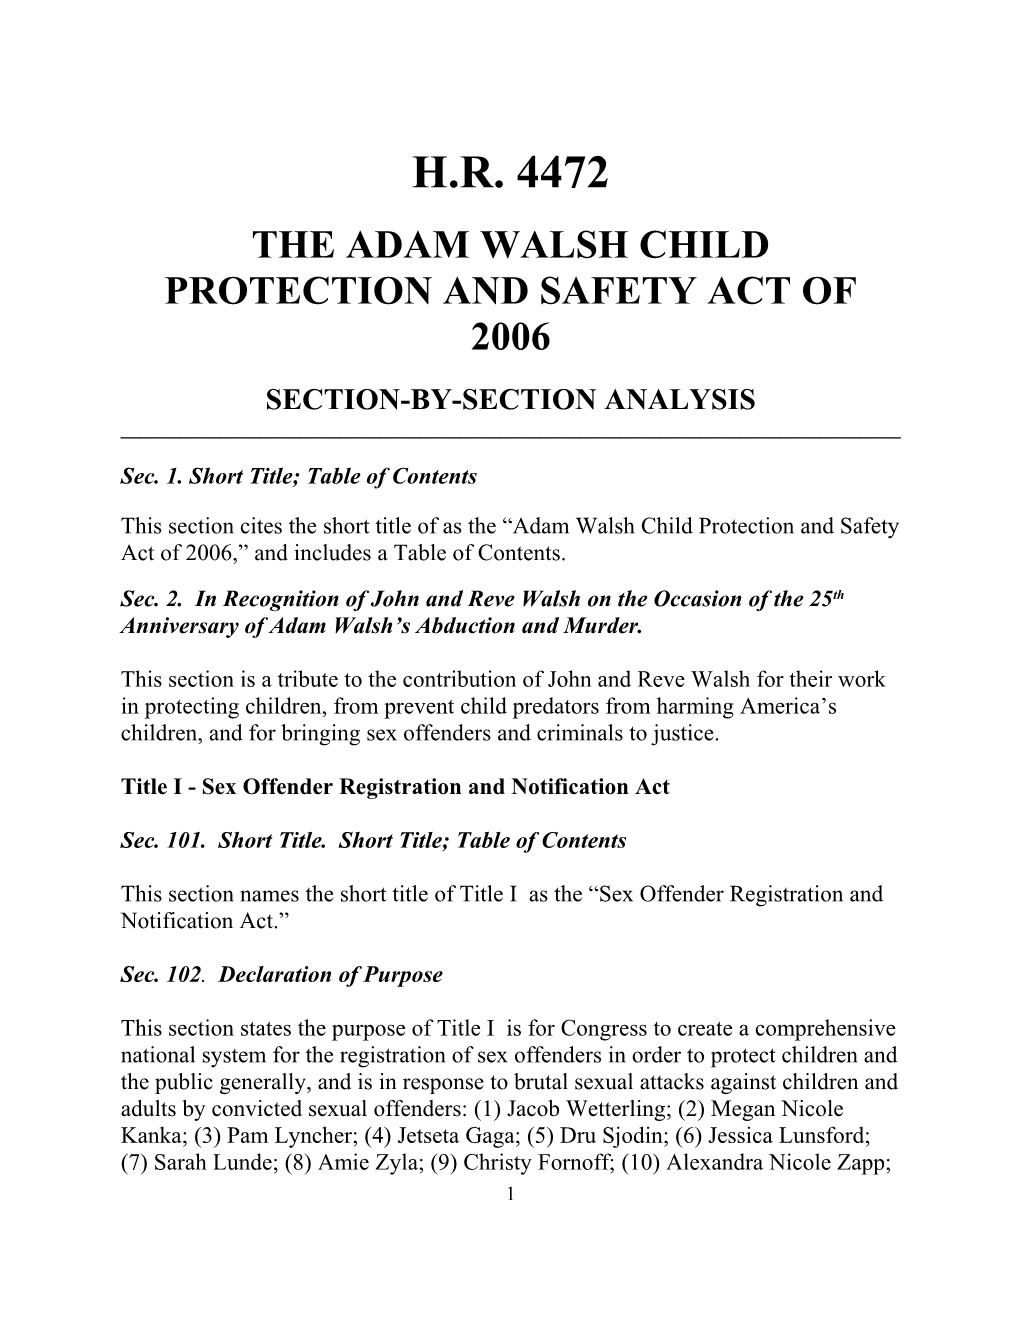 The Adam Walsh Child Protection and Safety Act of 2006